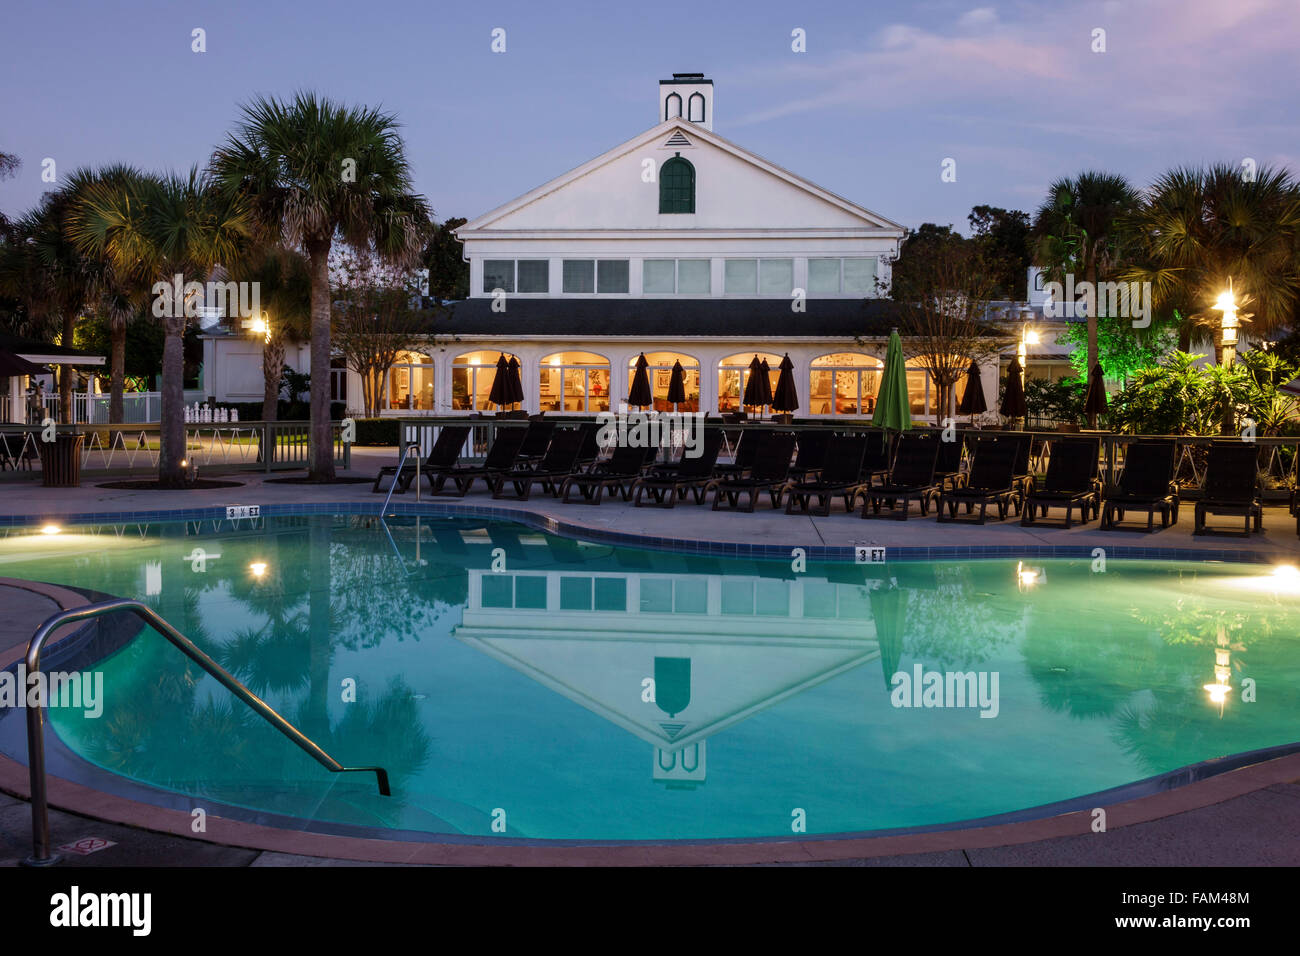 Florida Crystal River water,Plantation on Crystal River water Resort,hotel hotels lodging inn motel motels,evening,night,swimming pool area,visitors t Stock Photo